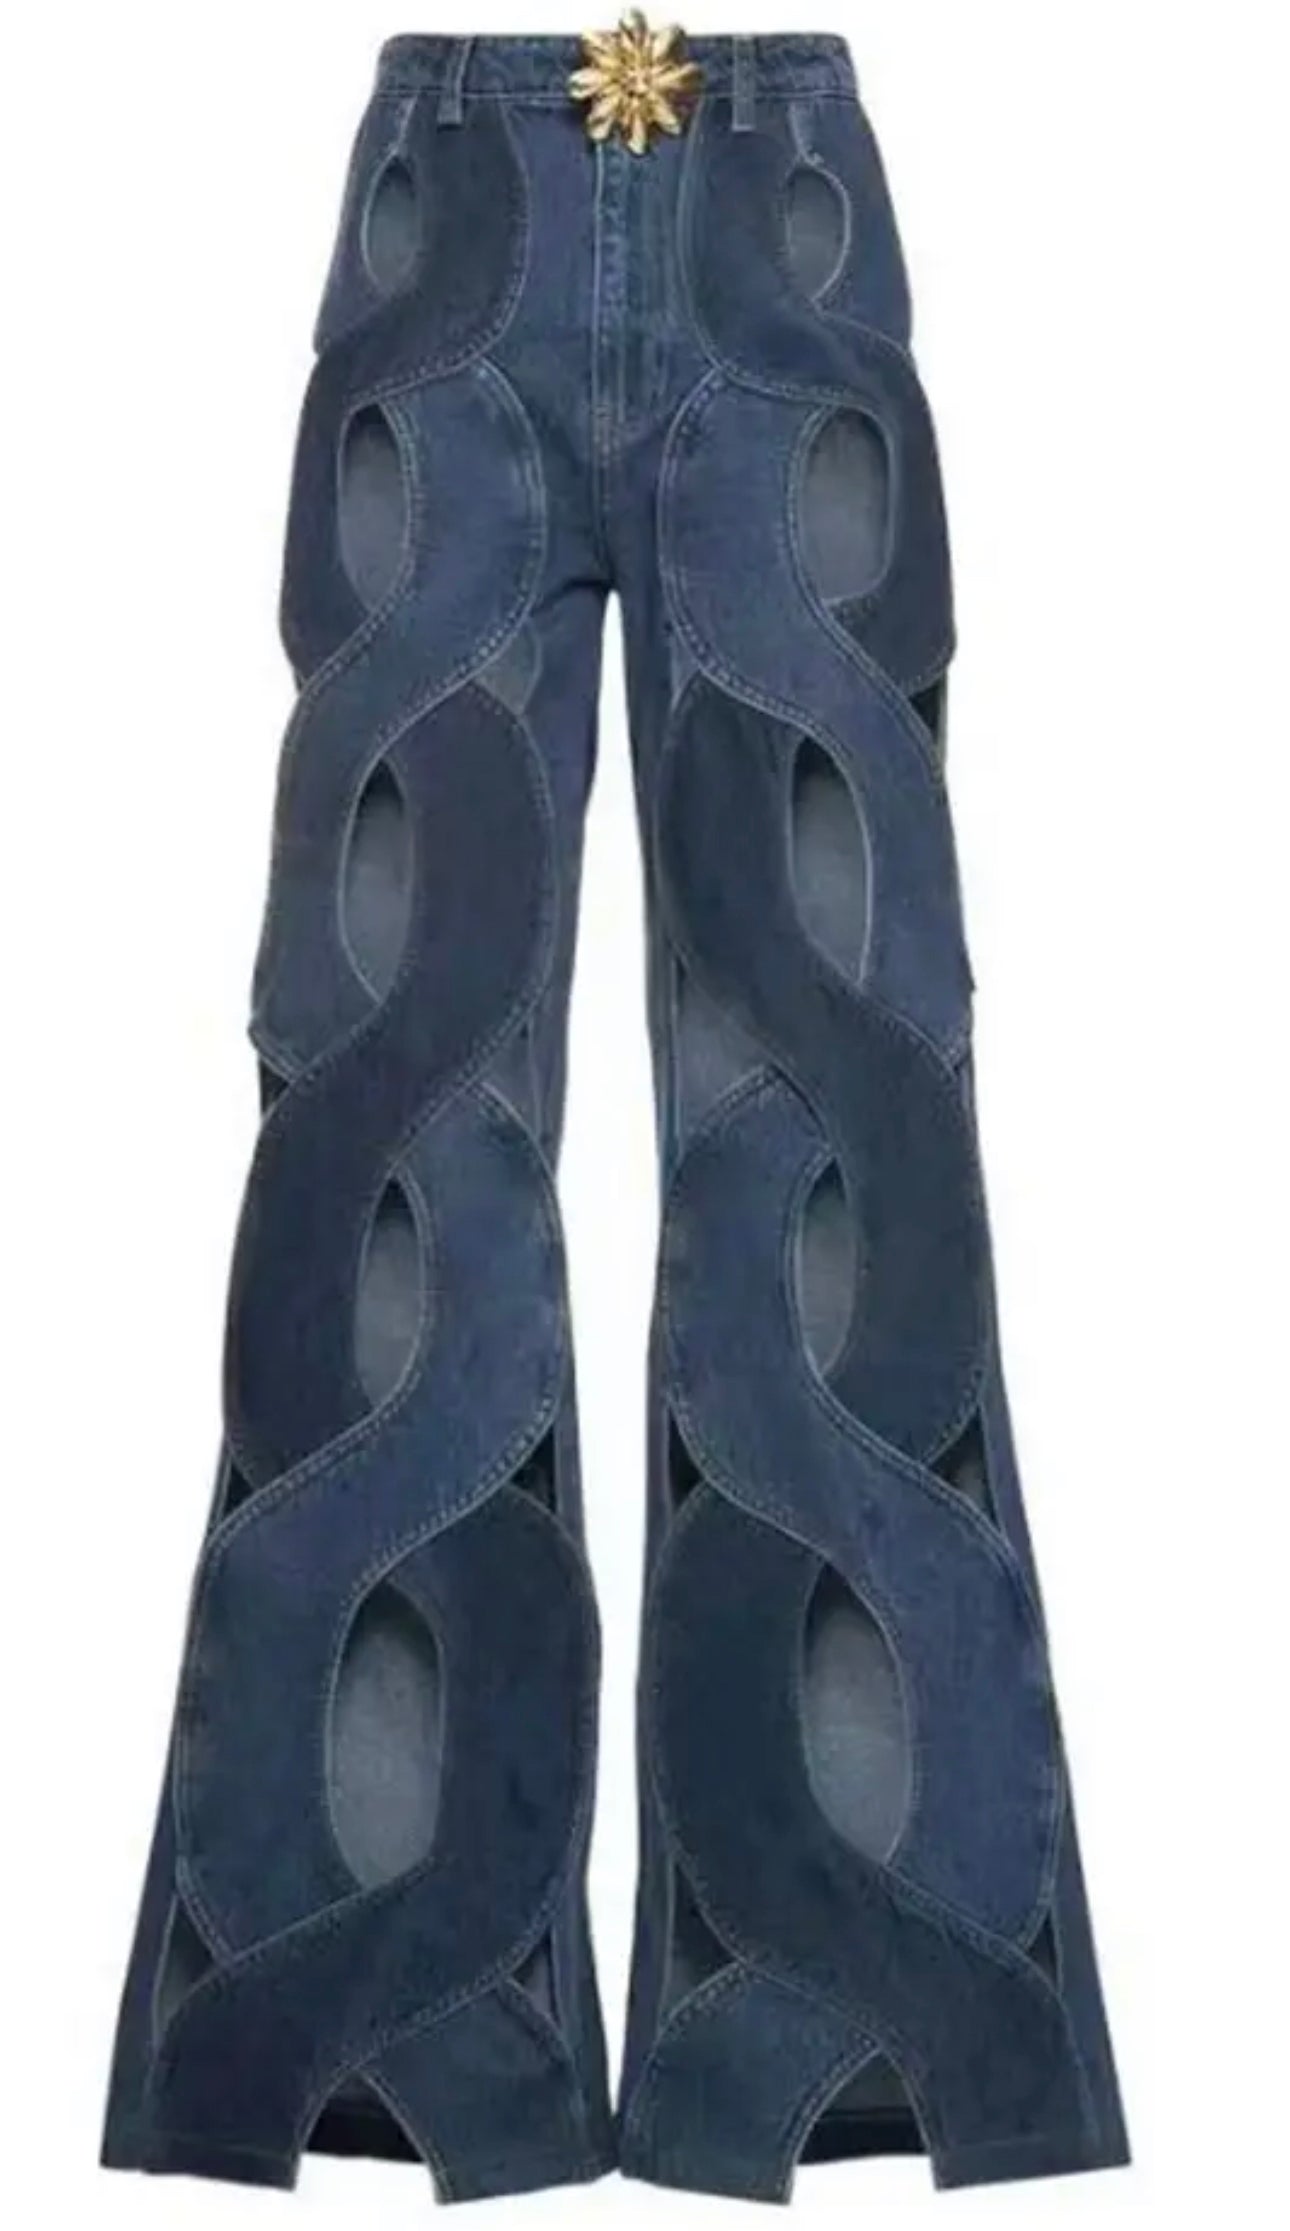 Twisted Chic Cutout Denim Jeans